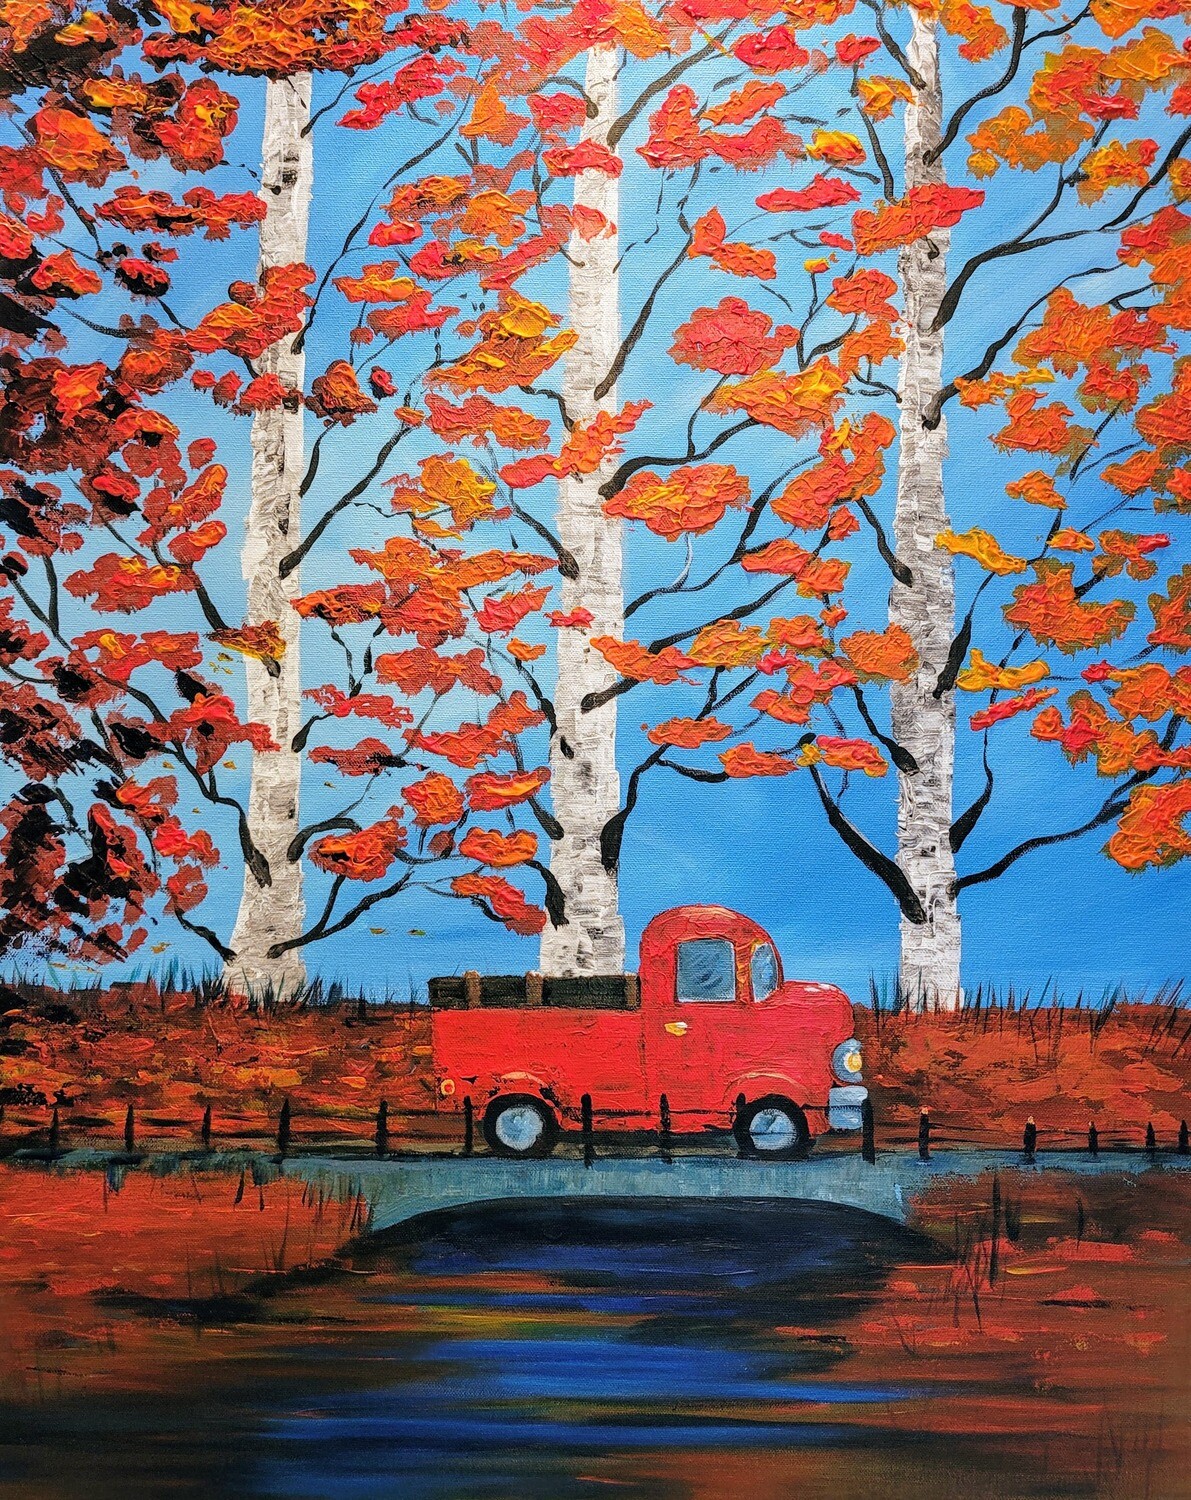 Painting: Autumn trees and red truck